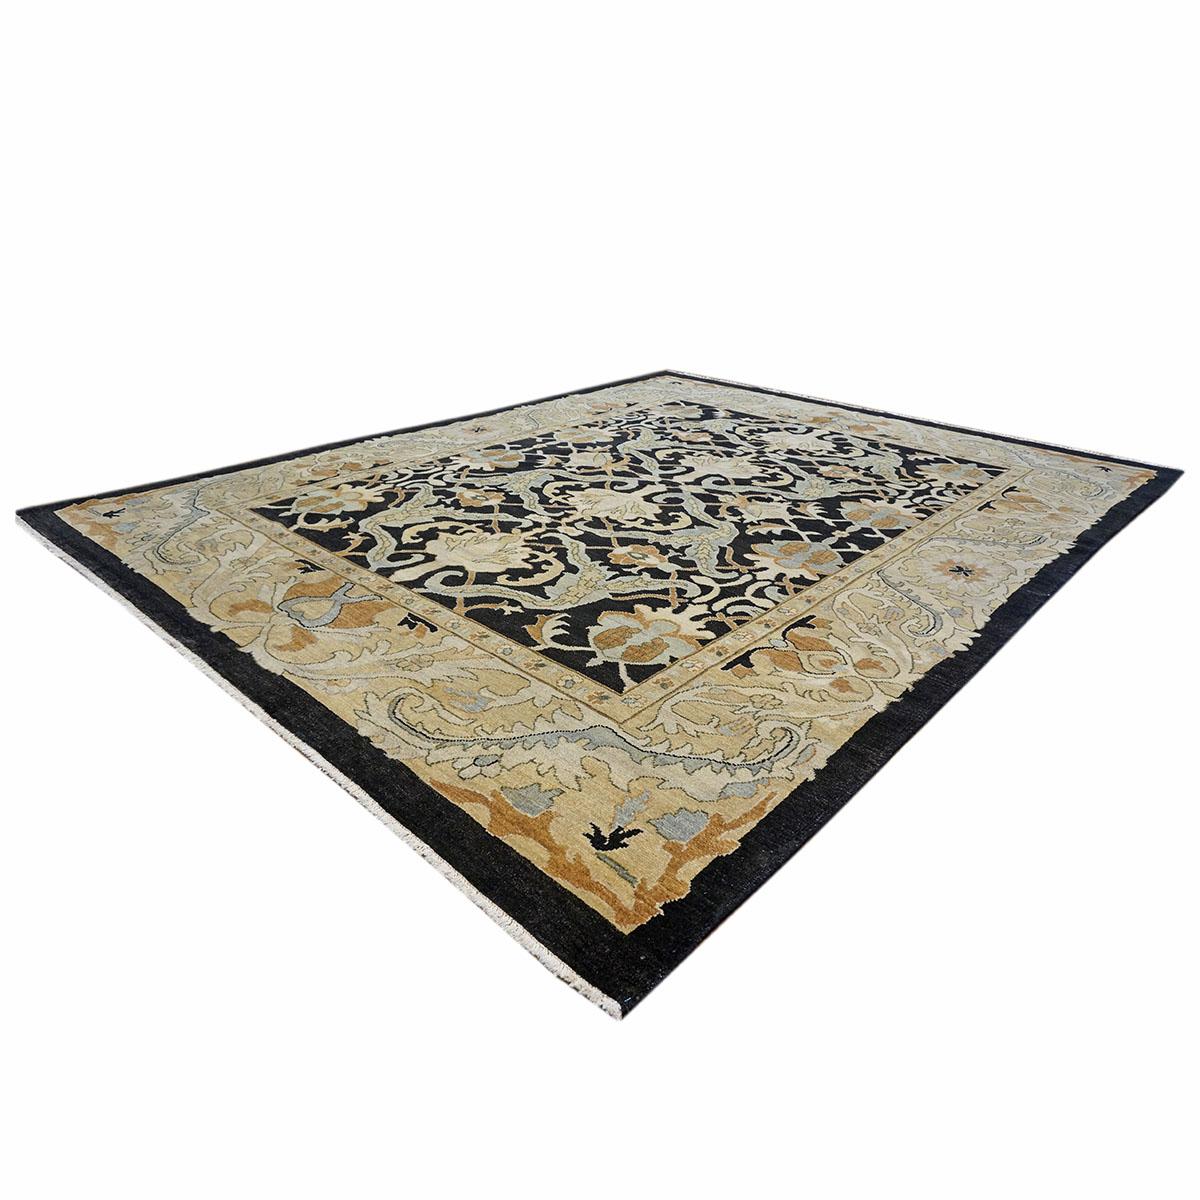 Afghan 21st Century Sultanabad 8x10 Tan and Black Handmade Wool Rug For Sale